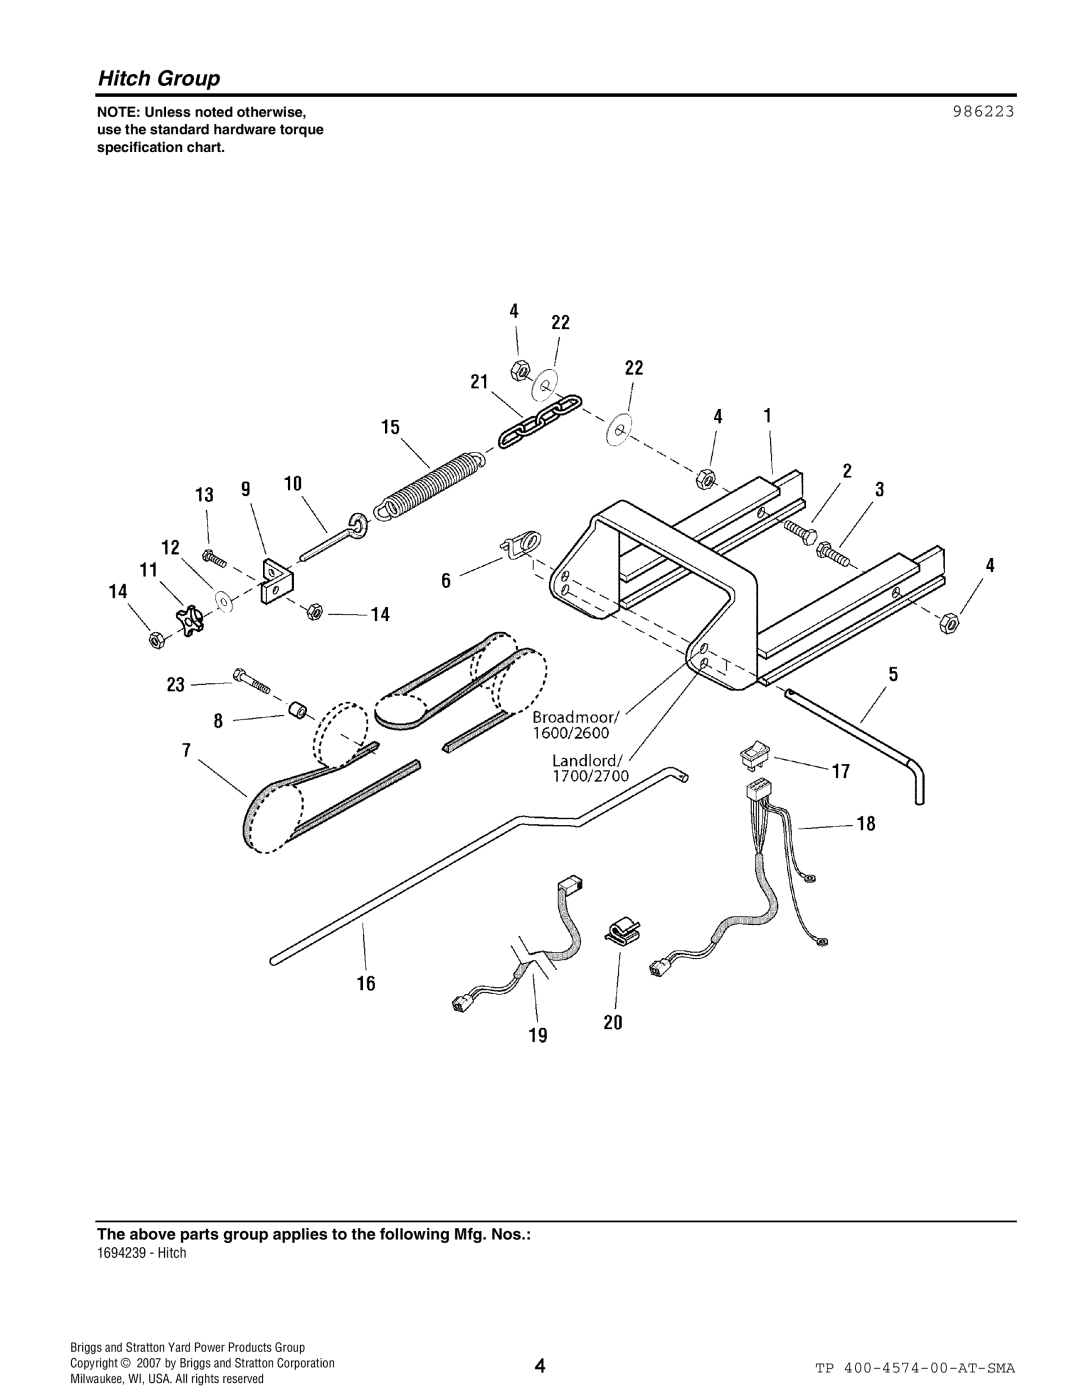 Snapper 4574 manual Hitch Group, 986223, NOTE Unless noted otherwise, Briggs and Stratton Yard Power Products Group 